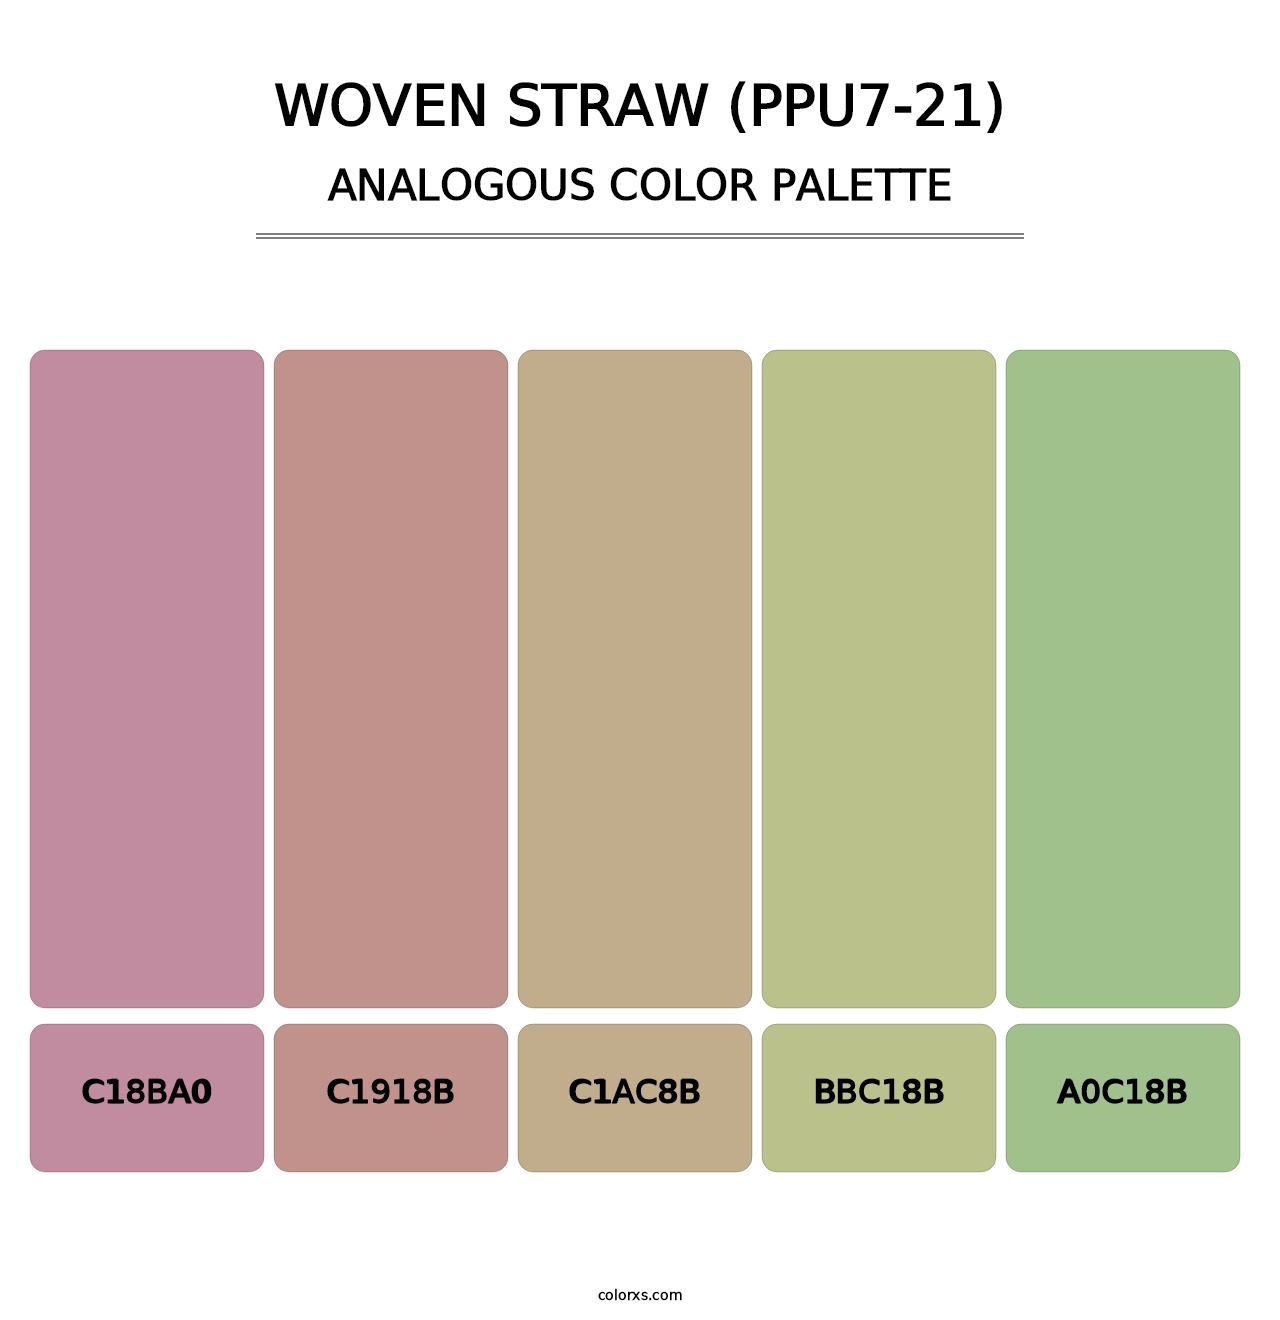 Woven Straw (PPU7-21) - Analogous Color Palette